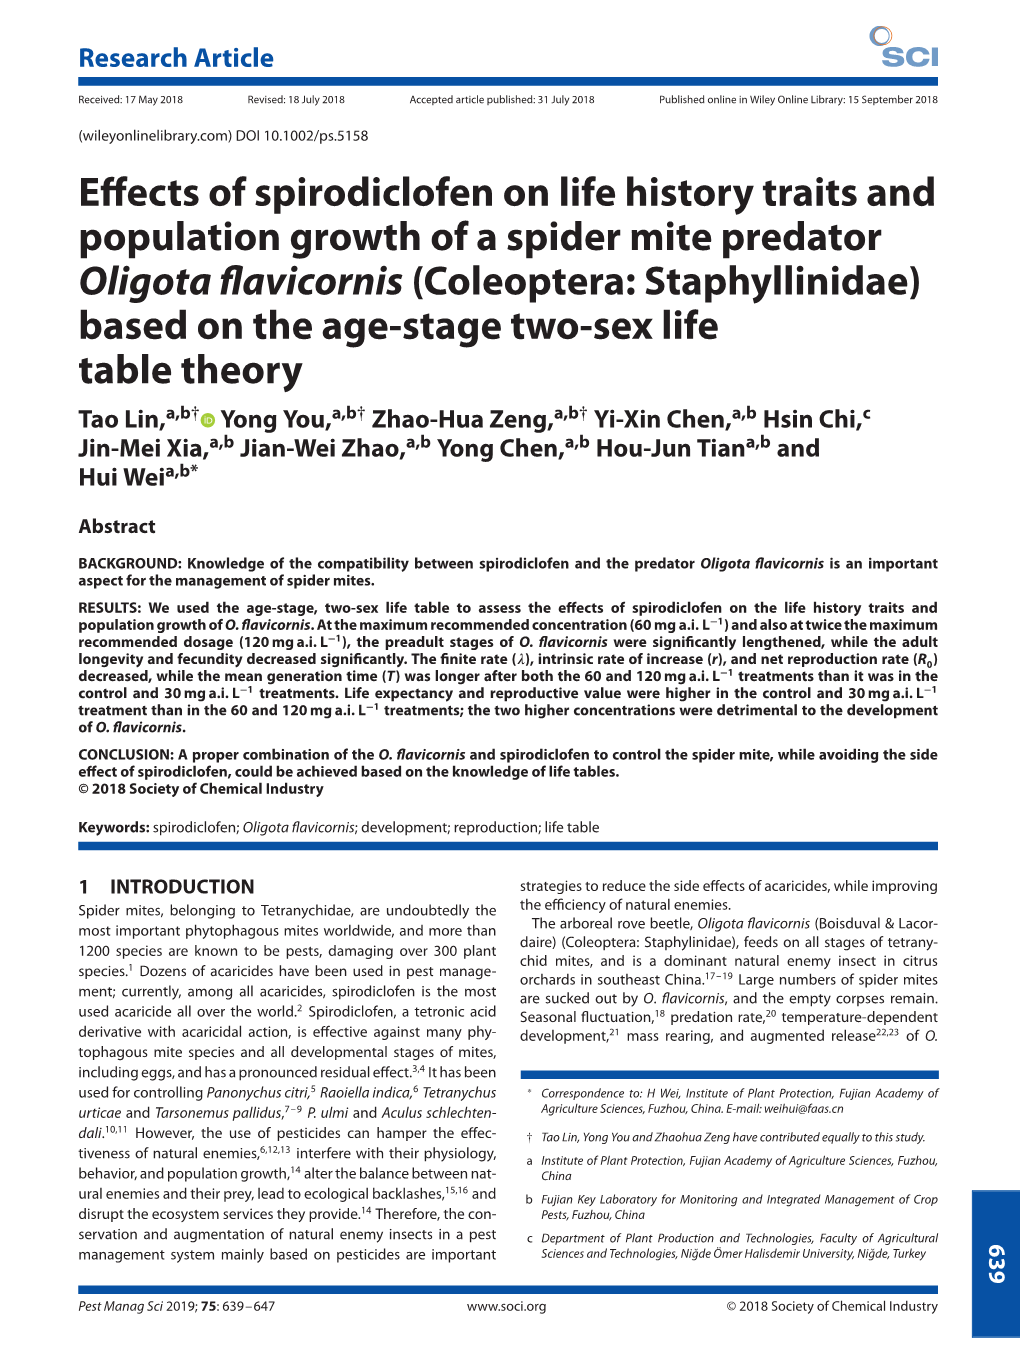 Effects of Spirodiclofen on Life History Traits and Population Growth of A